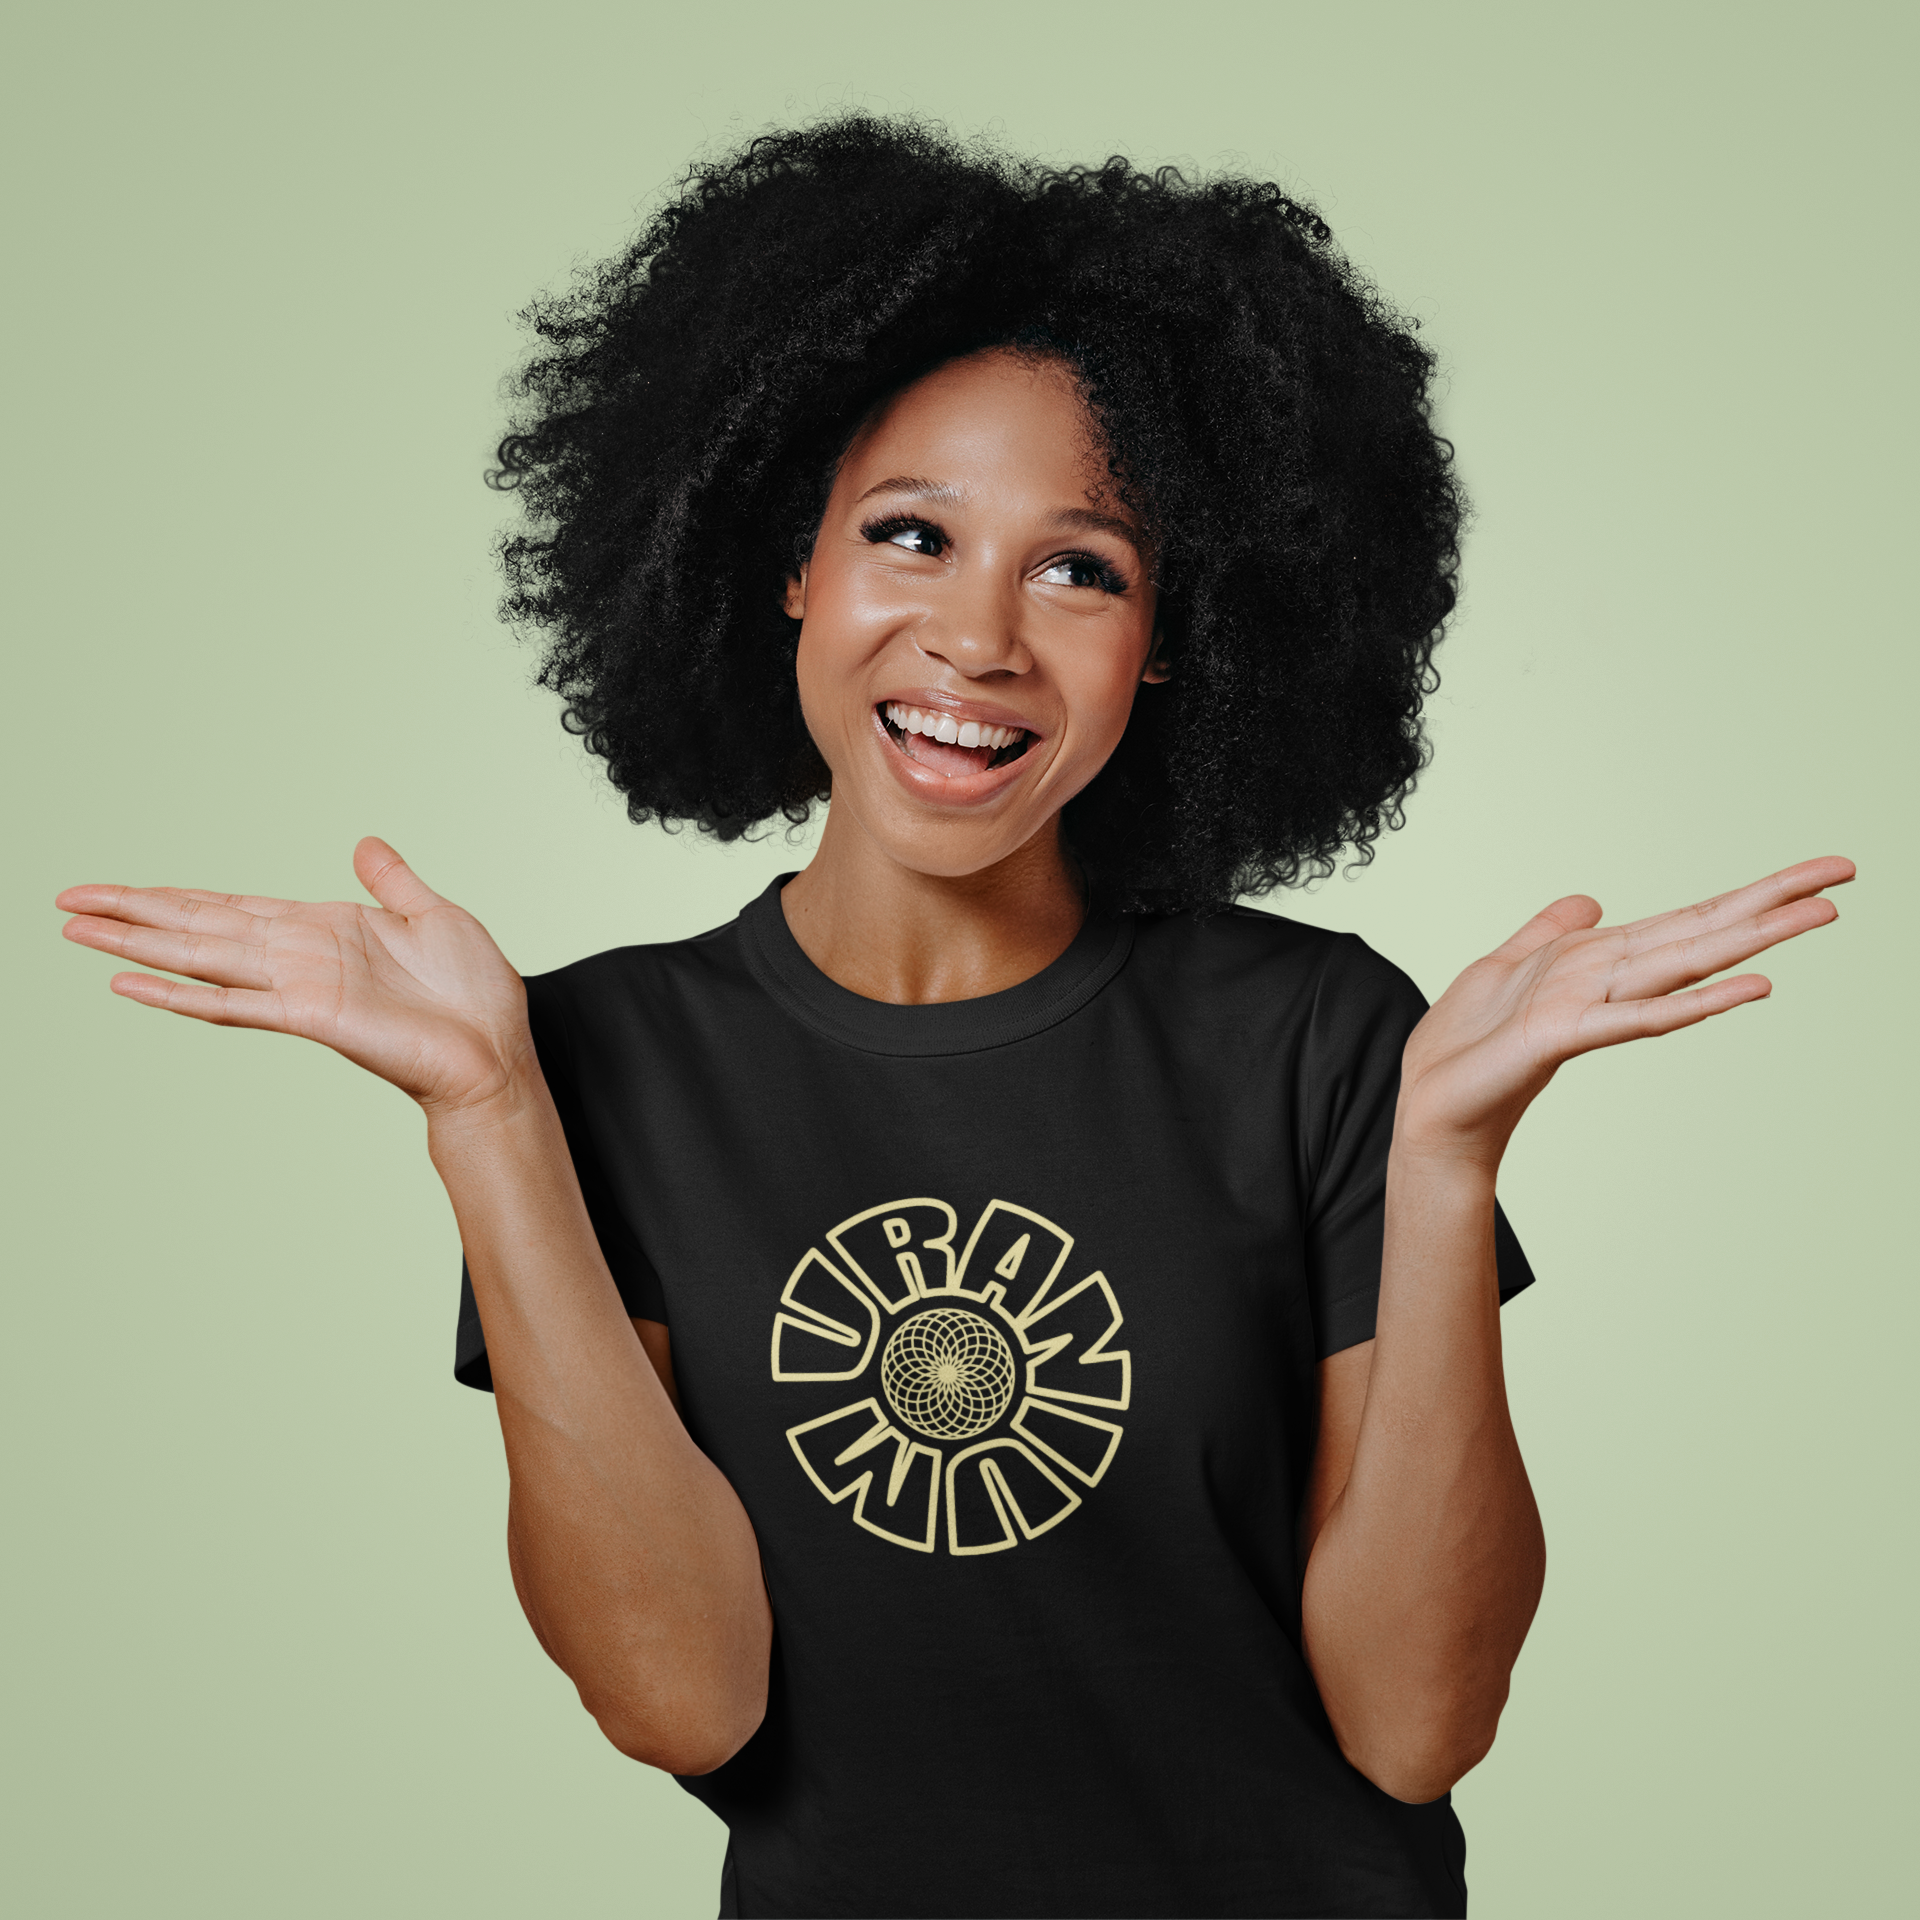 t-shirt-mockup-of-a-funny-woman-with-kinky-hair-m12684-r-el2.png